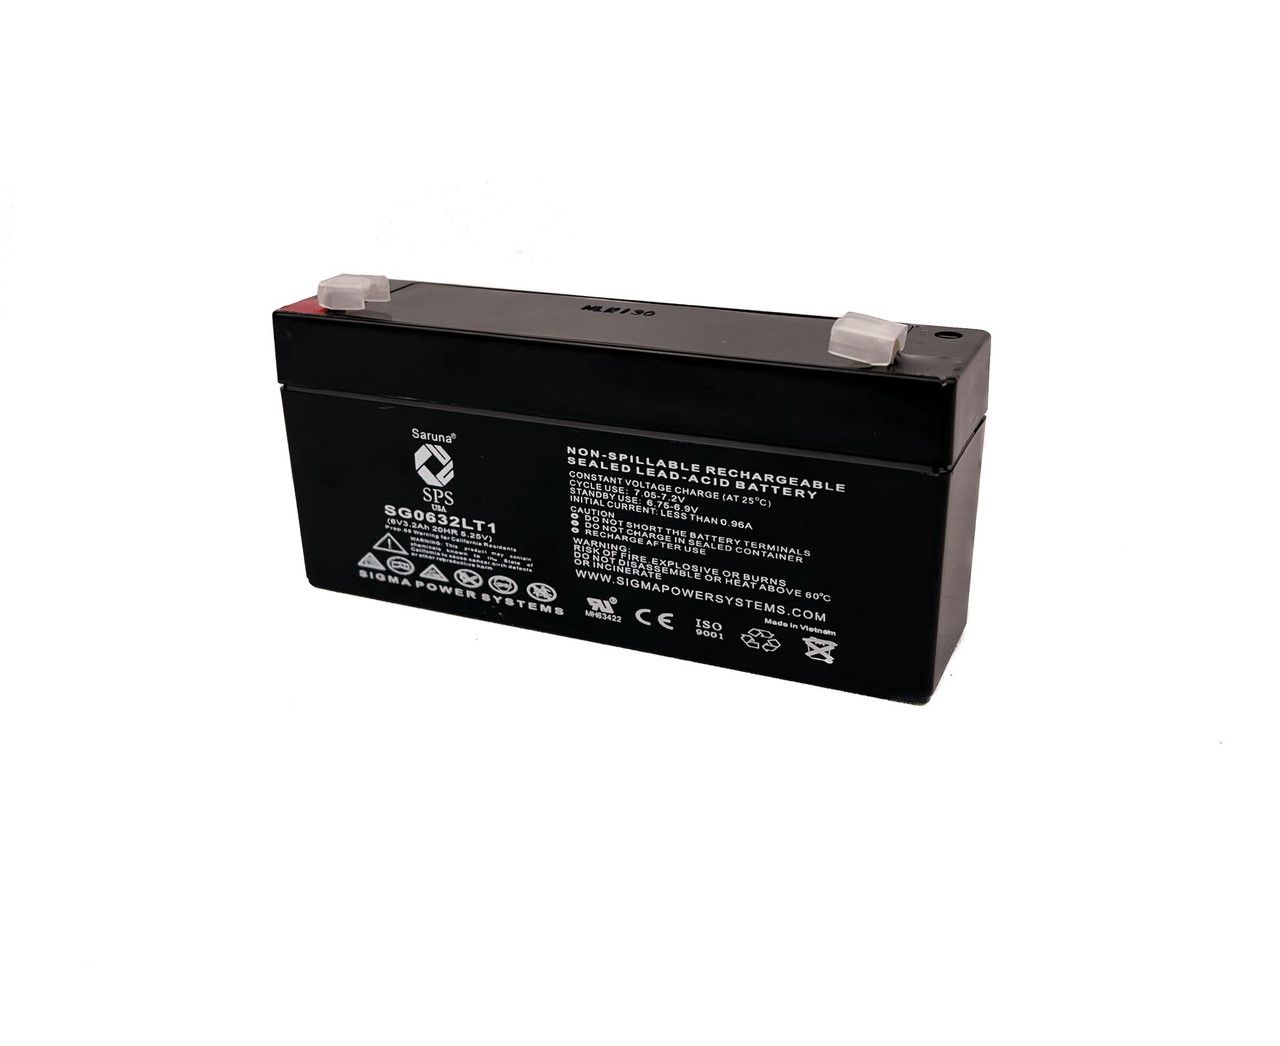 Raion Power 6V 3.2Ah Non-Spillable Replacement Rechargebale Battery for Health o meter 592 Scale